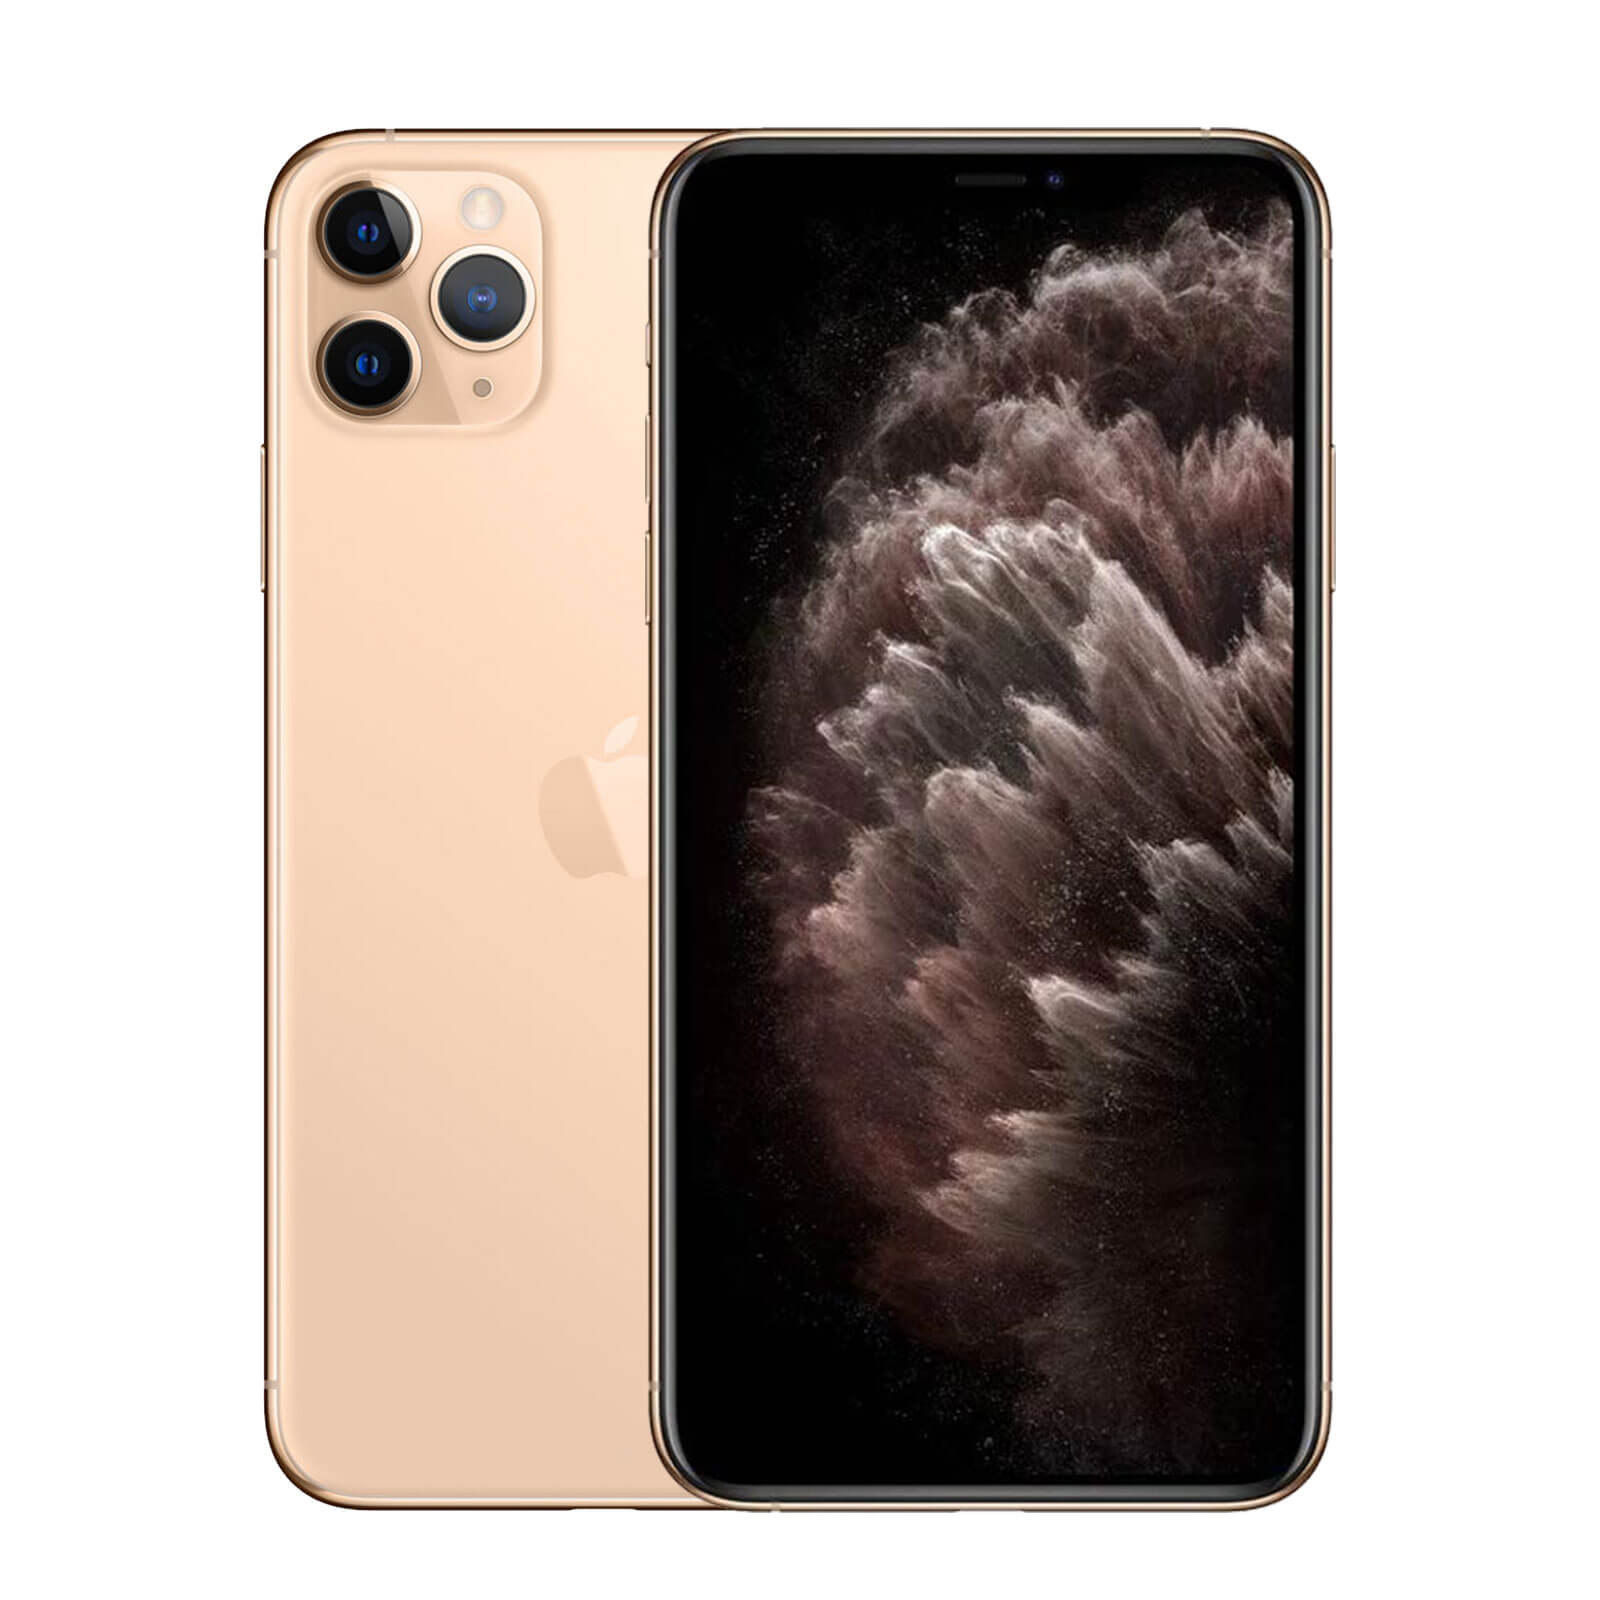 Apple iPhone 11 Pro 256GB Gold Good - AT&T